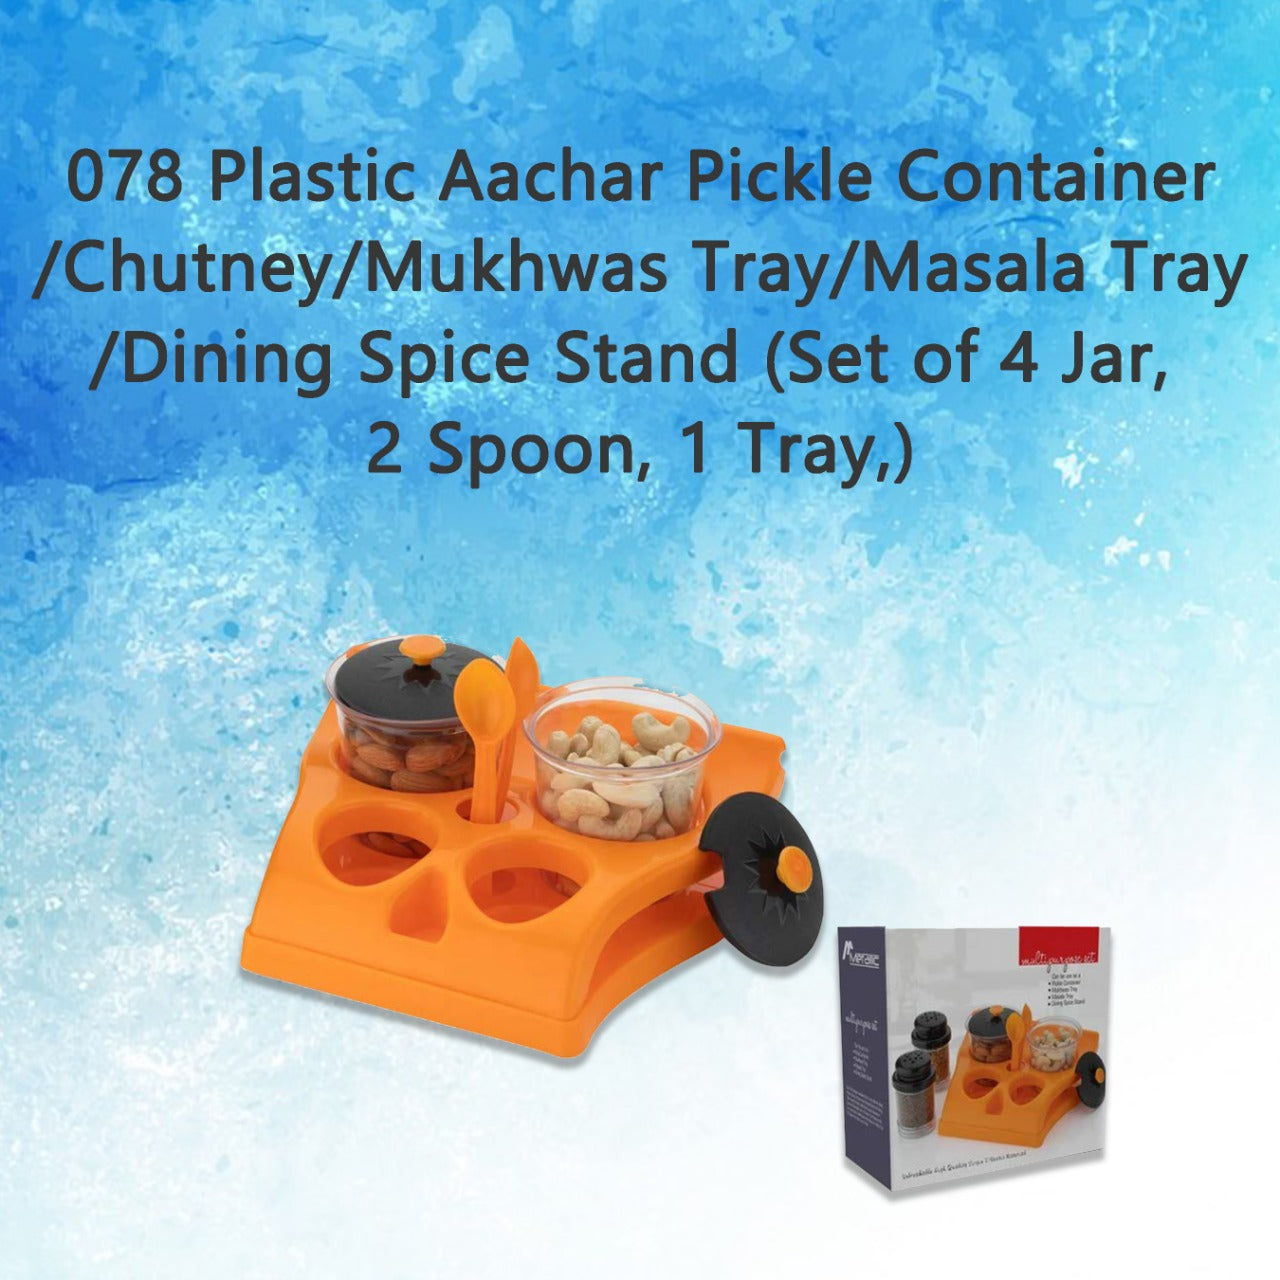 Plastic Aachar Pickle Container/Chutney/Mukhwas Tray/Masala Tray/Dining Spice Stand (Set of 4 Jar, 2 Spoon, 1 Tray) 